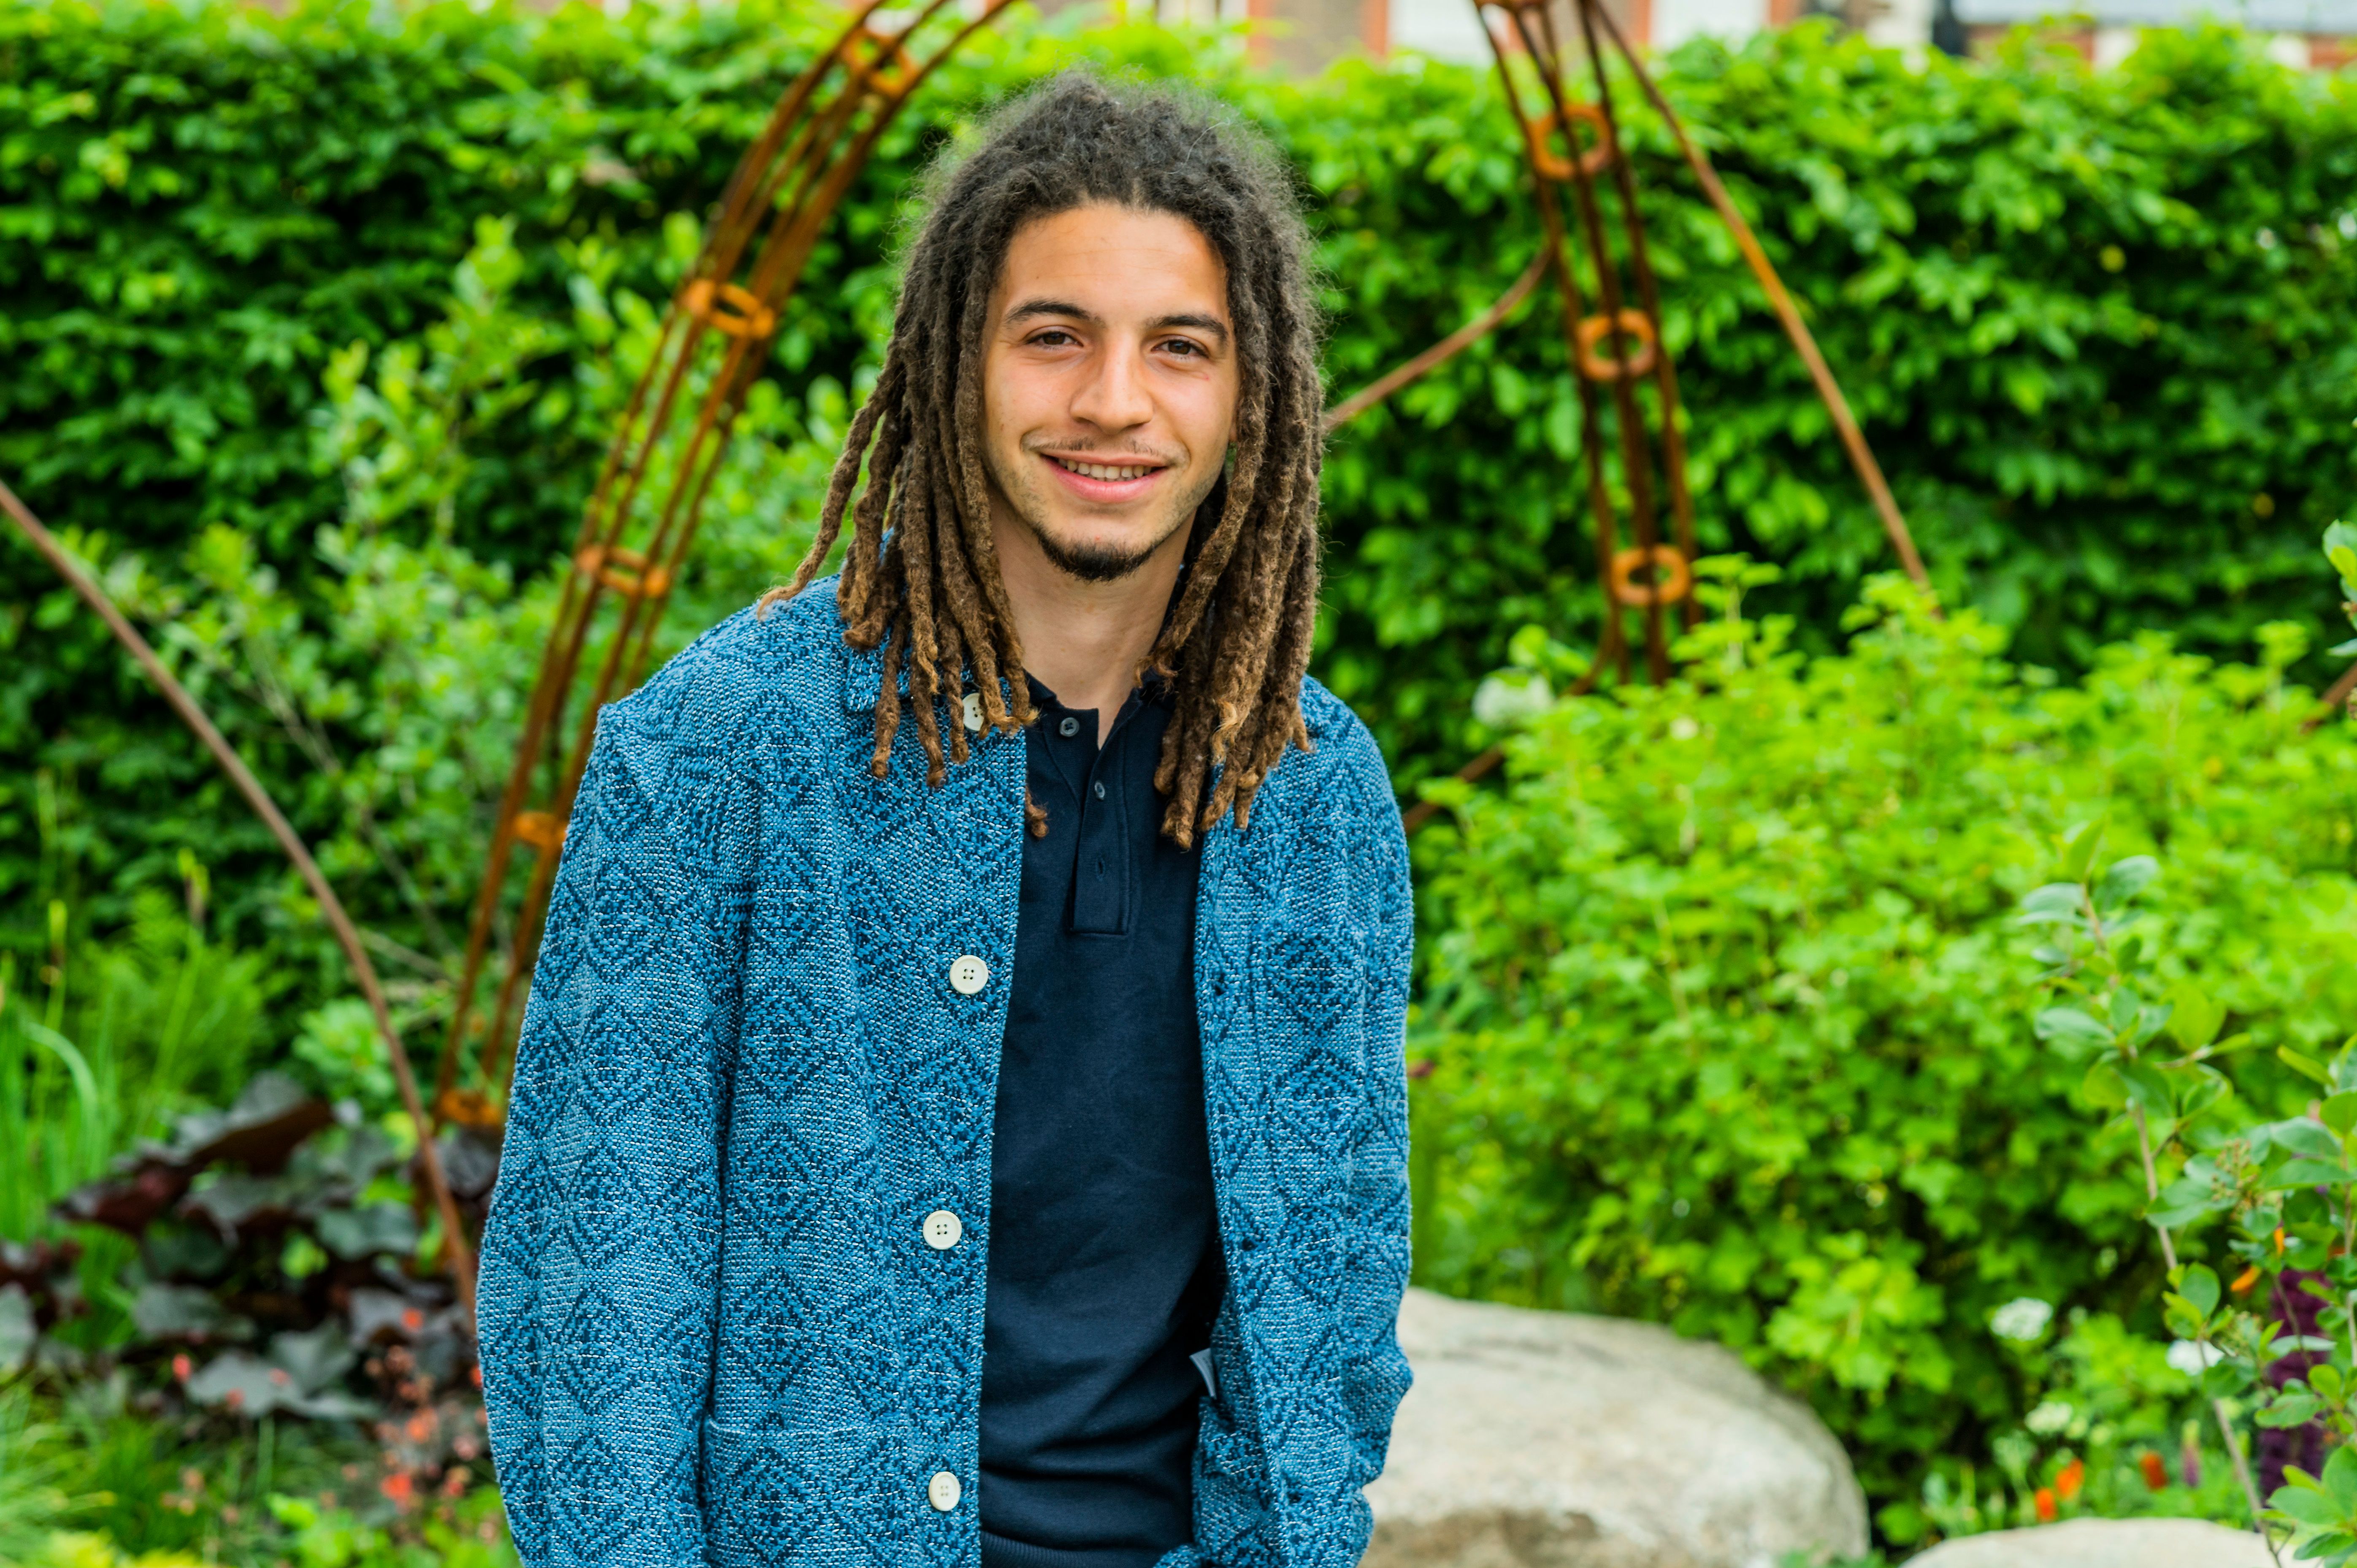 Tayshan Hayden-Smith poses in front of the “Hands Off Mangrove” garden at the Chelsea Flower Show.